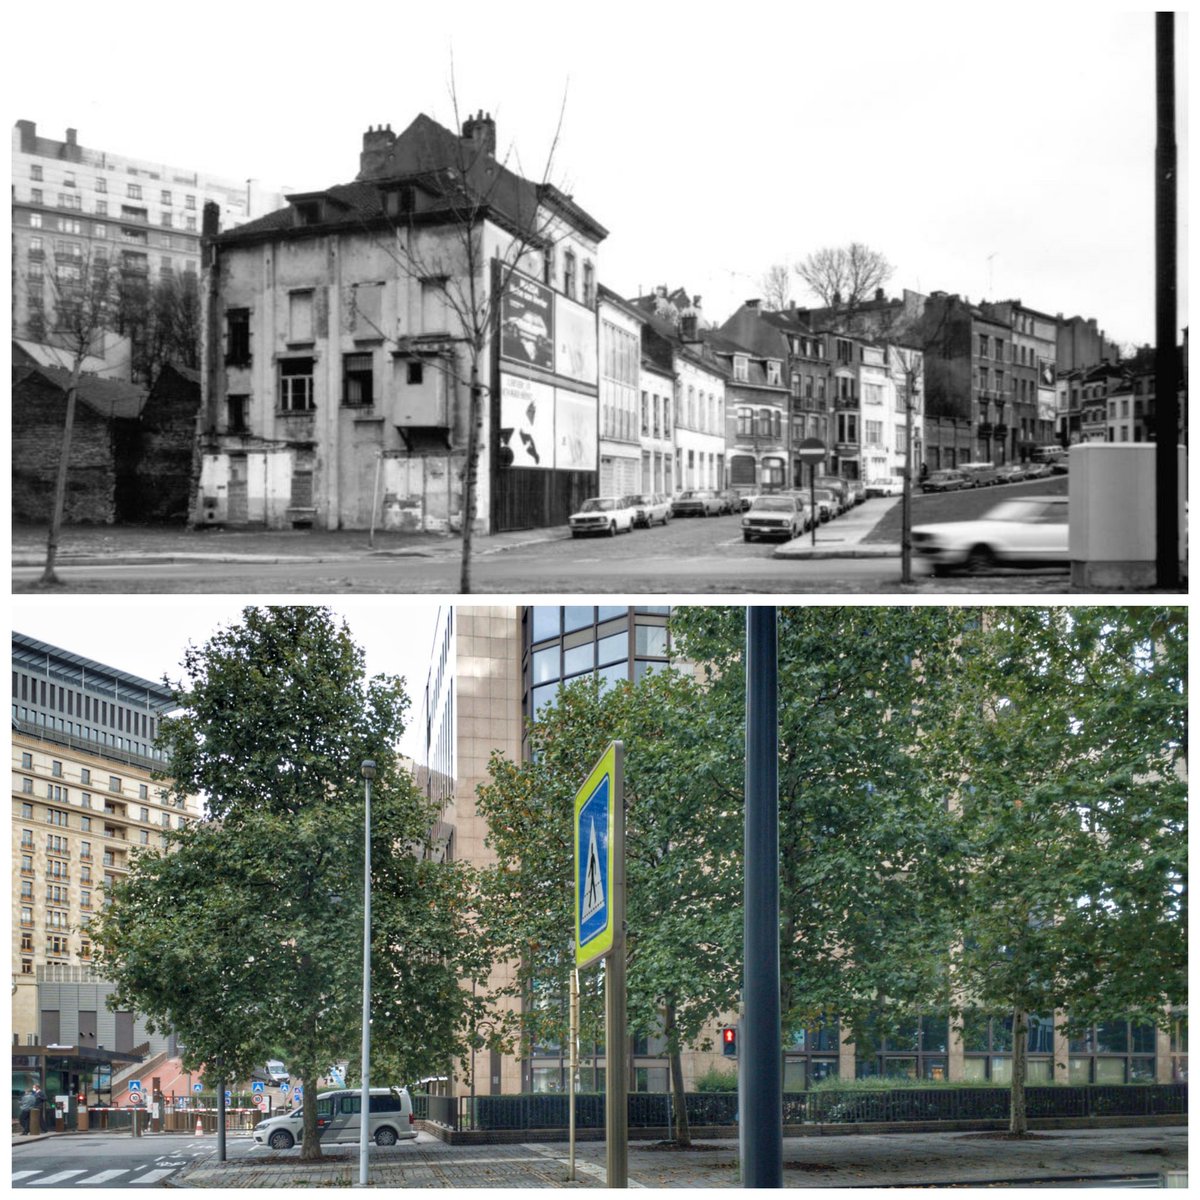 Rue de la Verveine in the 1970s and its position now, long since gobbled up by whatever that building is. Résidence Palace on the left.